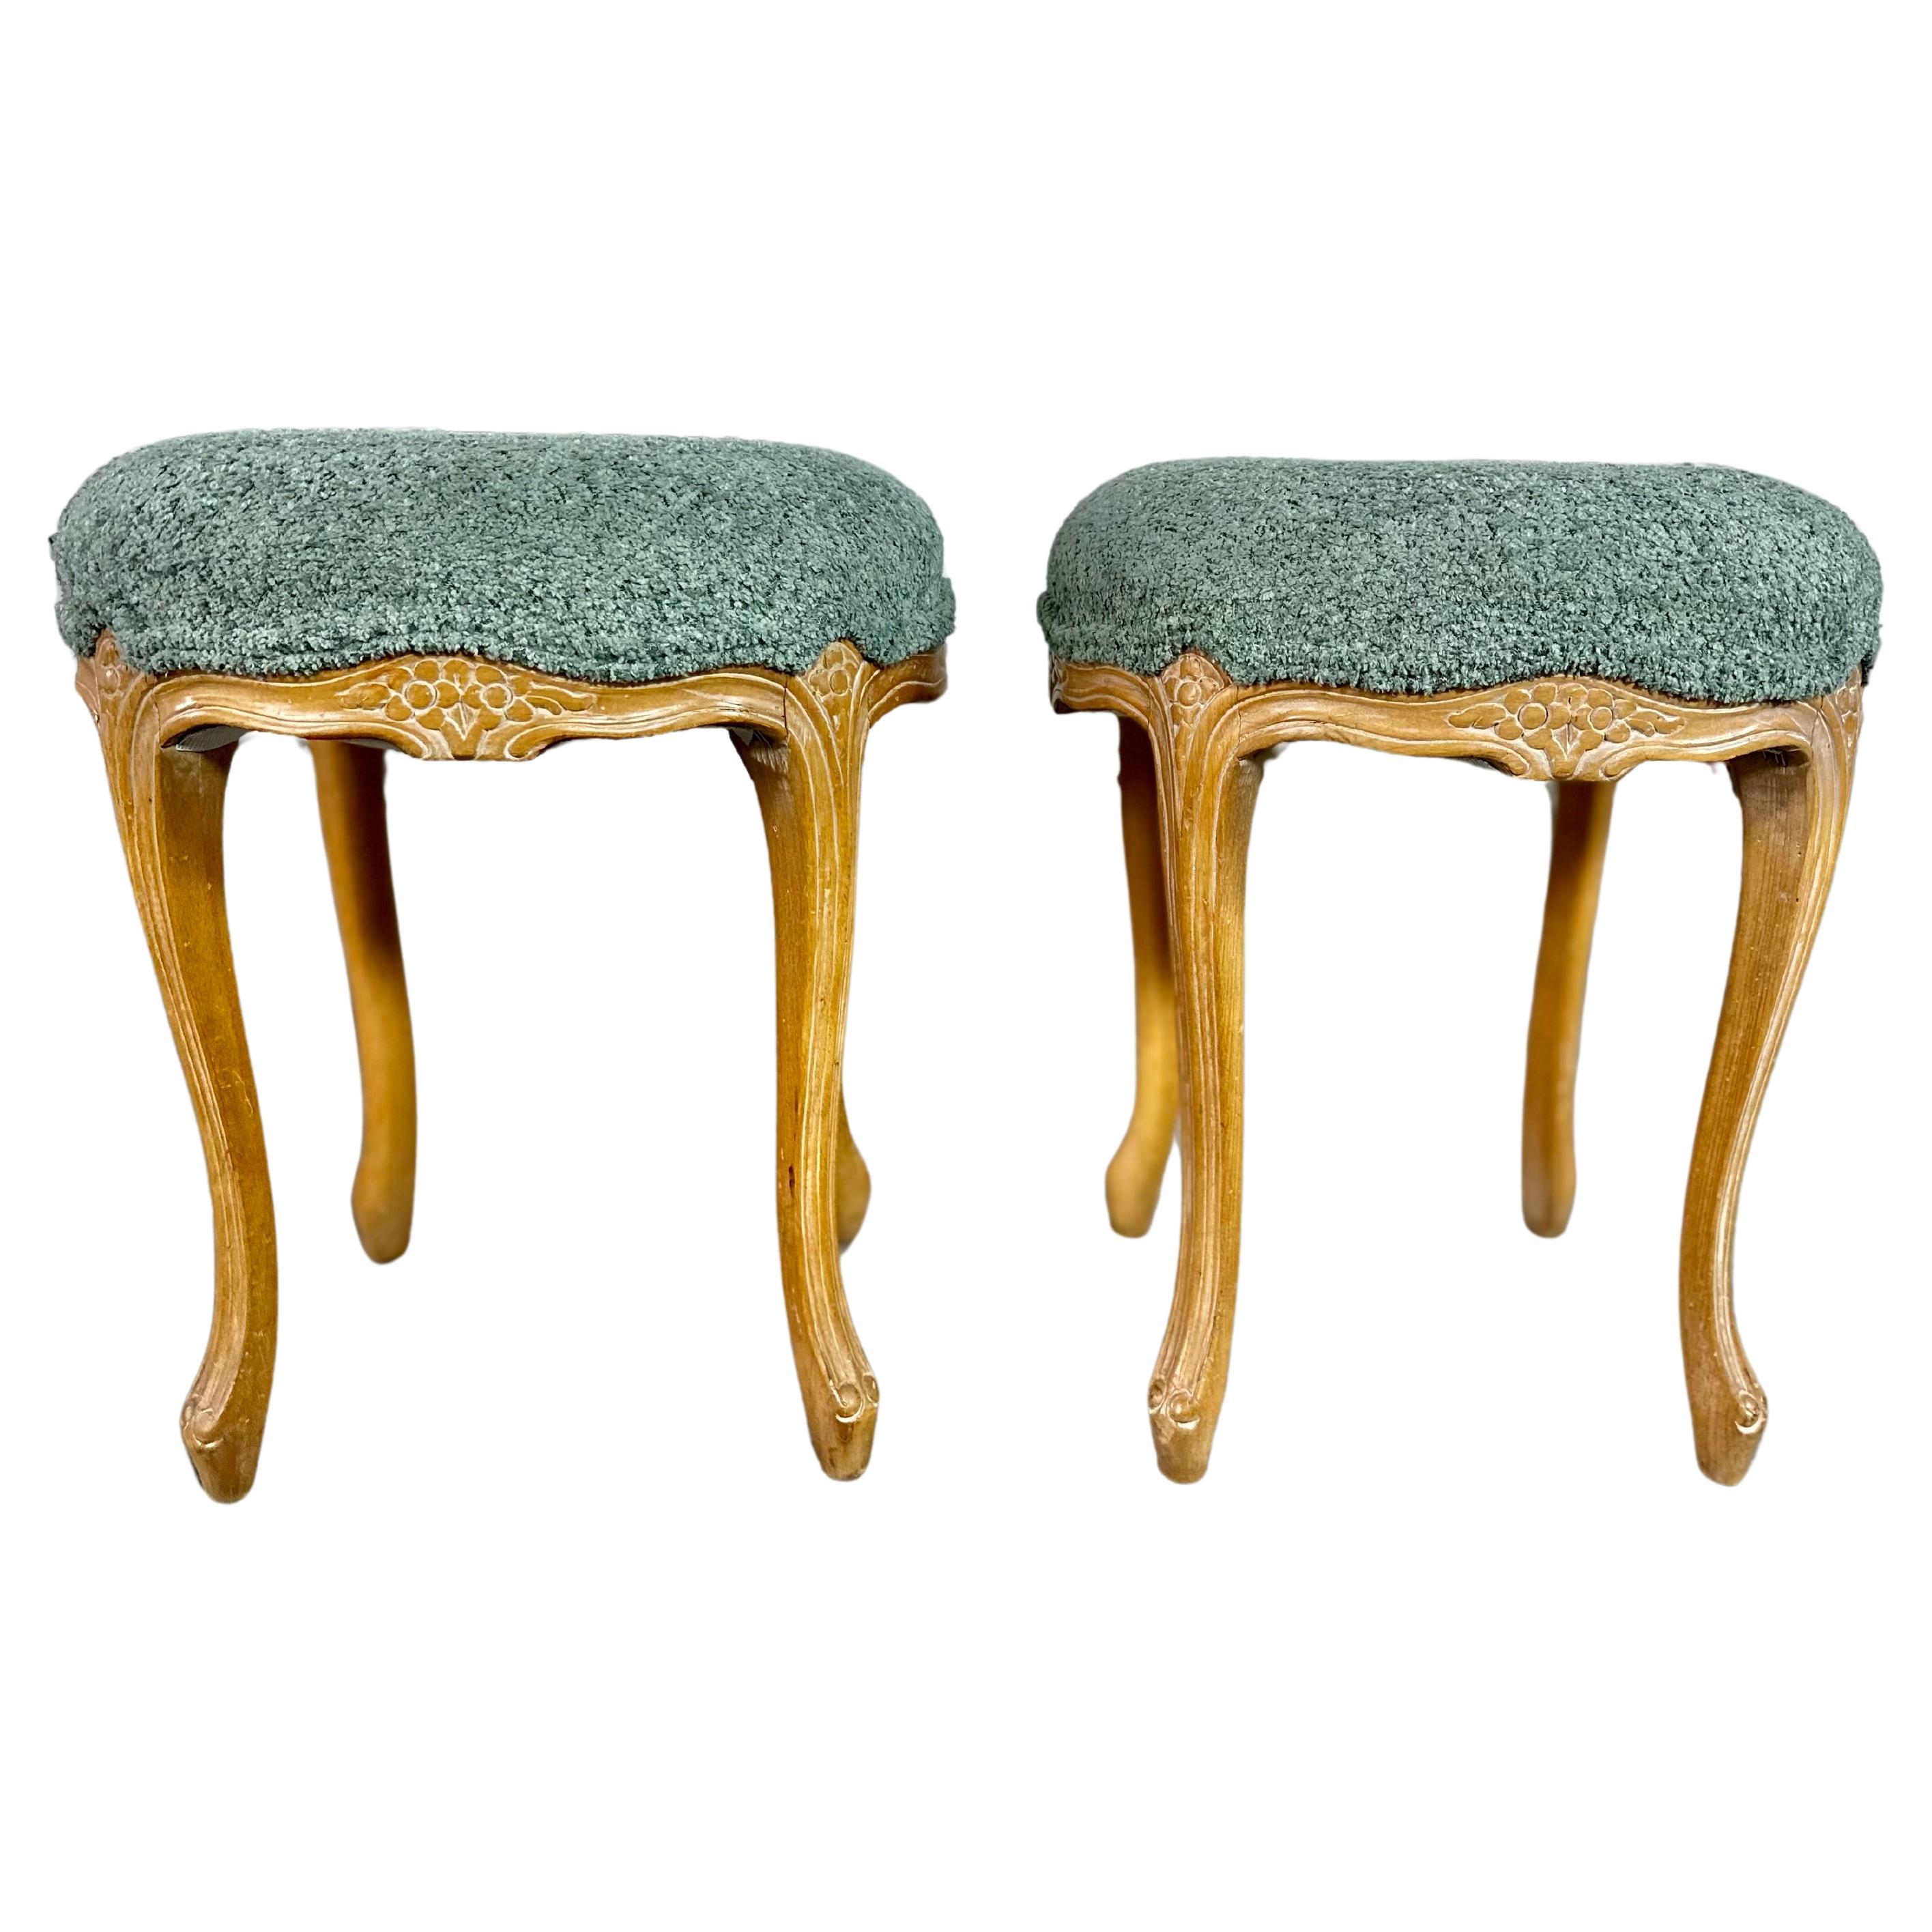 Reupholstered French Louis XV Style Ottomans Footstools - a Pair